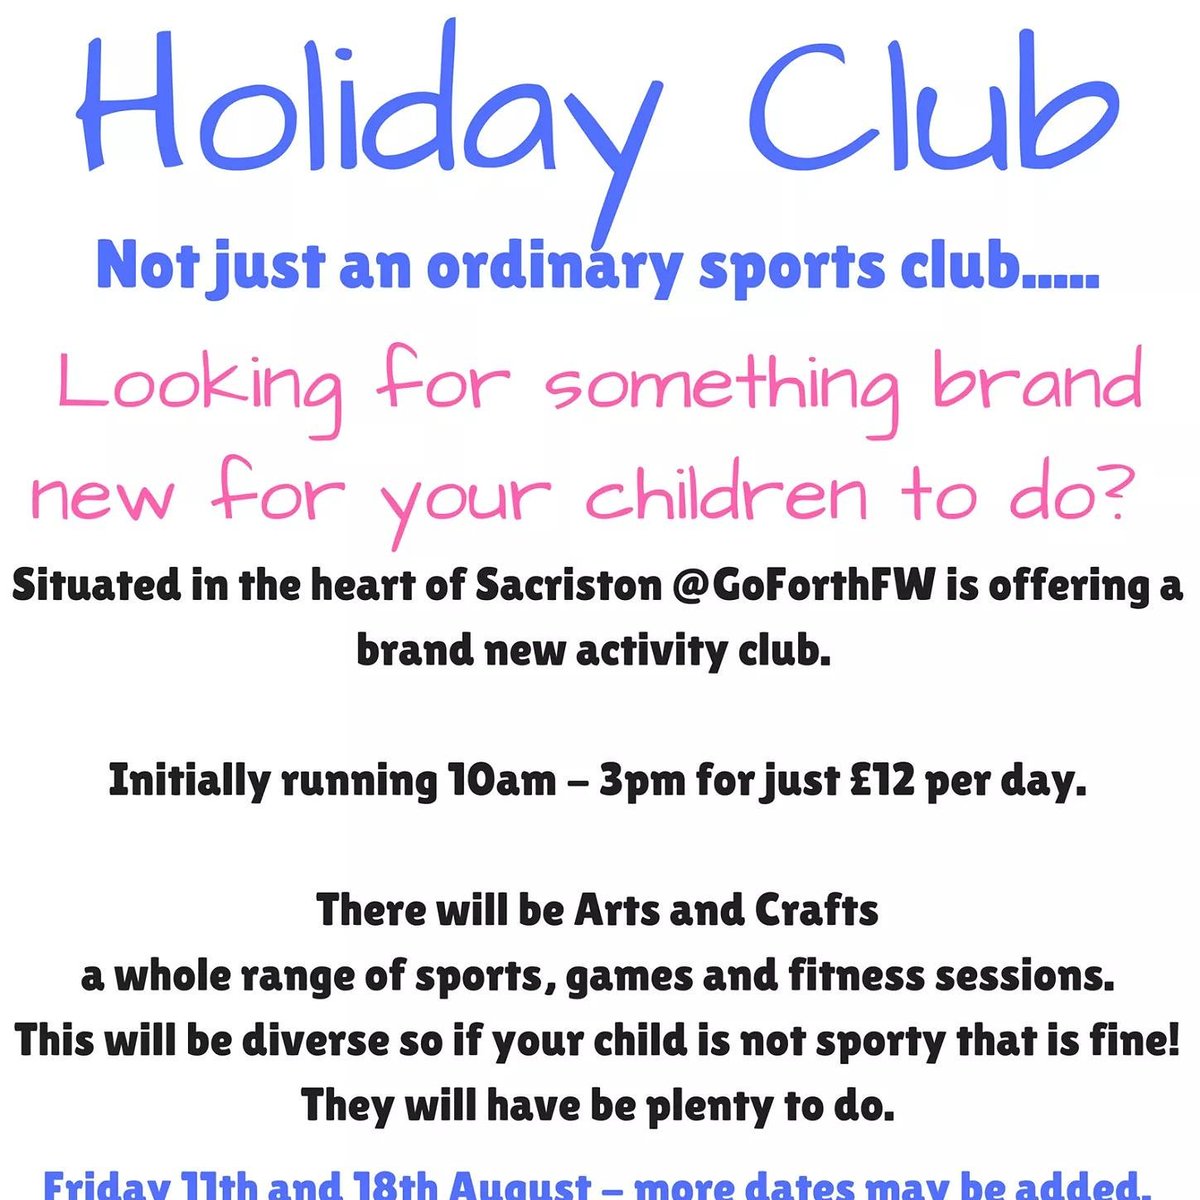 So excited for this, just a few spaces left. #holidayfun #notjustsport @StBedeSacriston @IWCYC  @SacristonShops